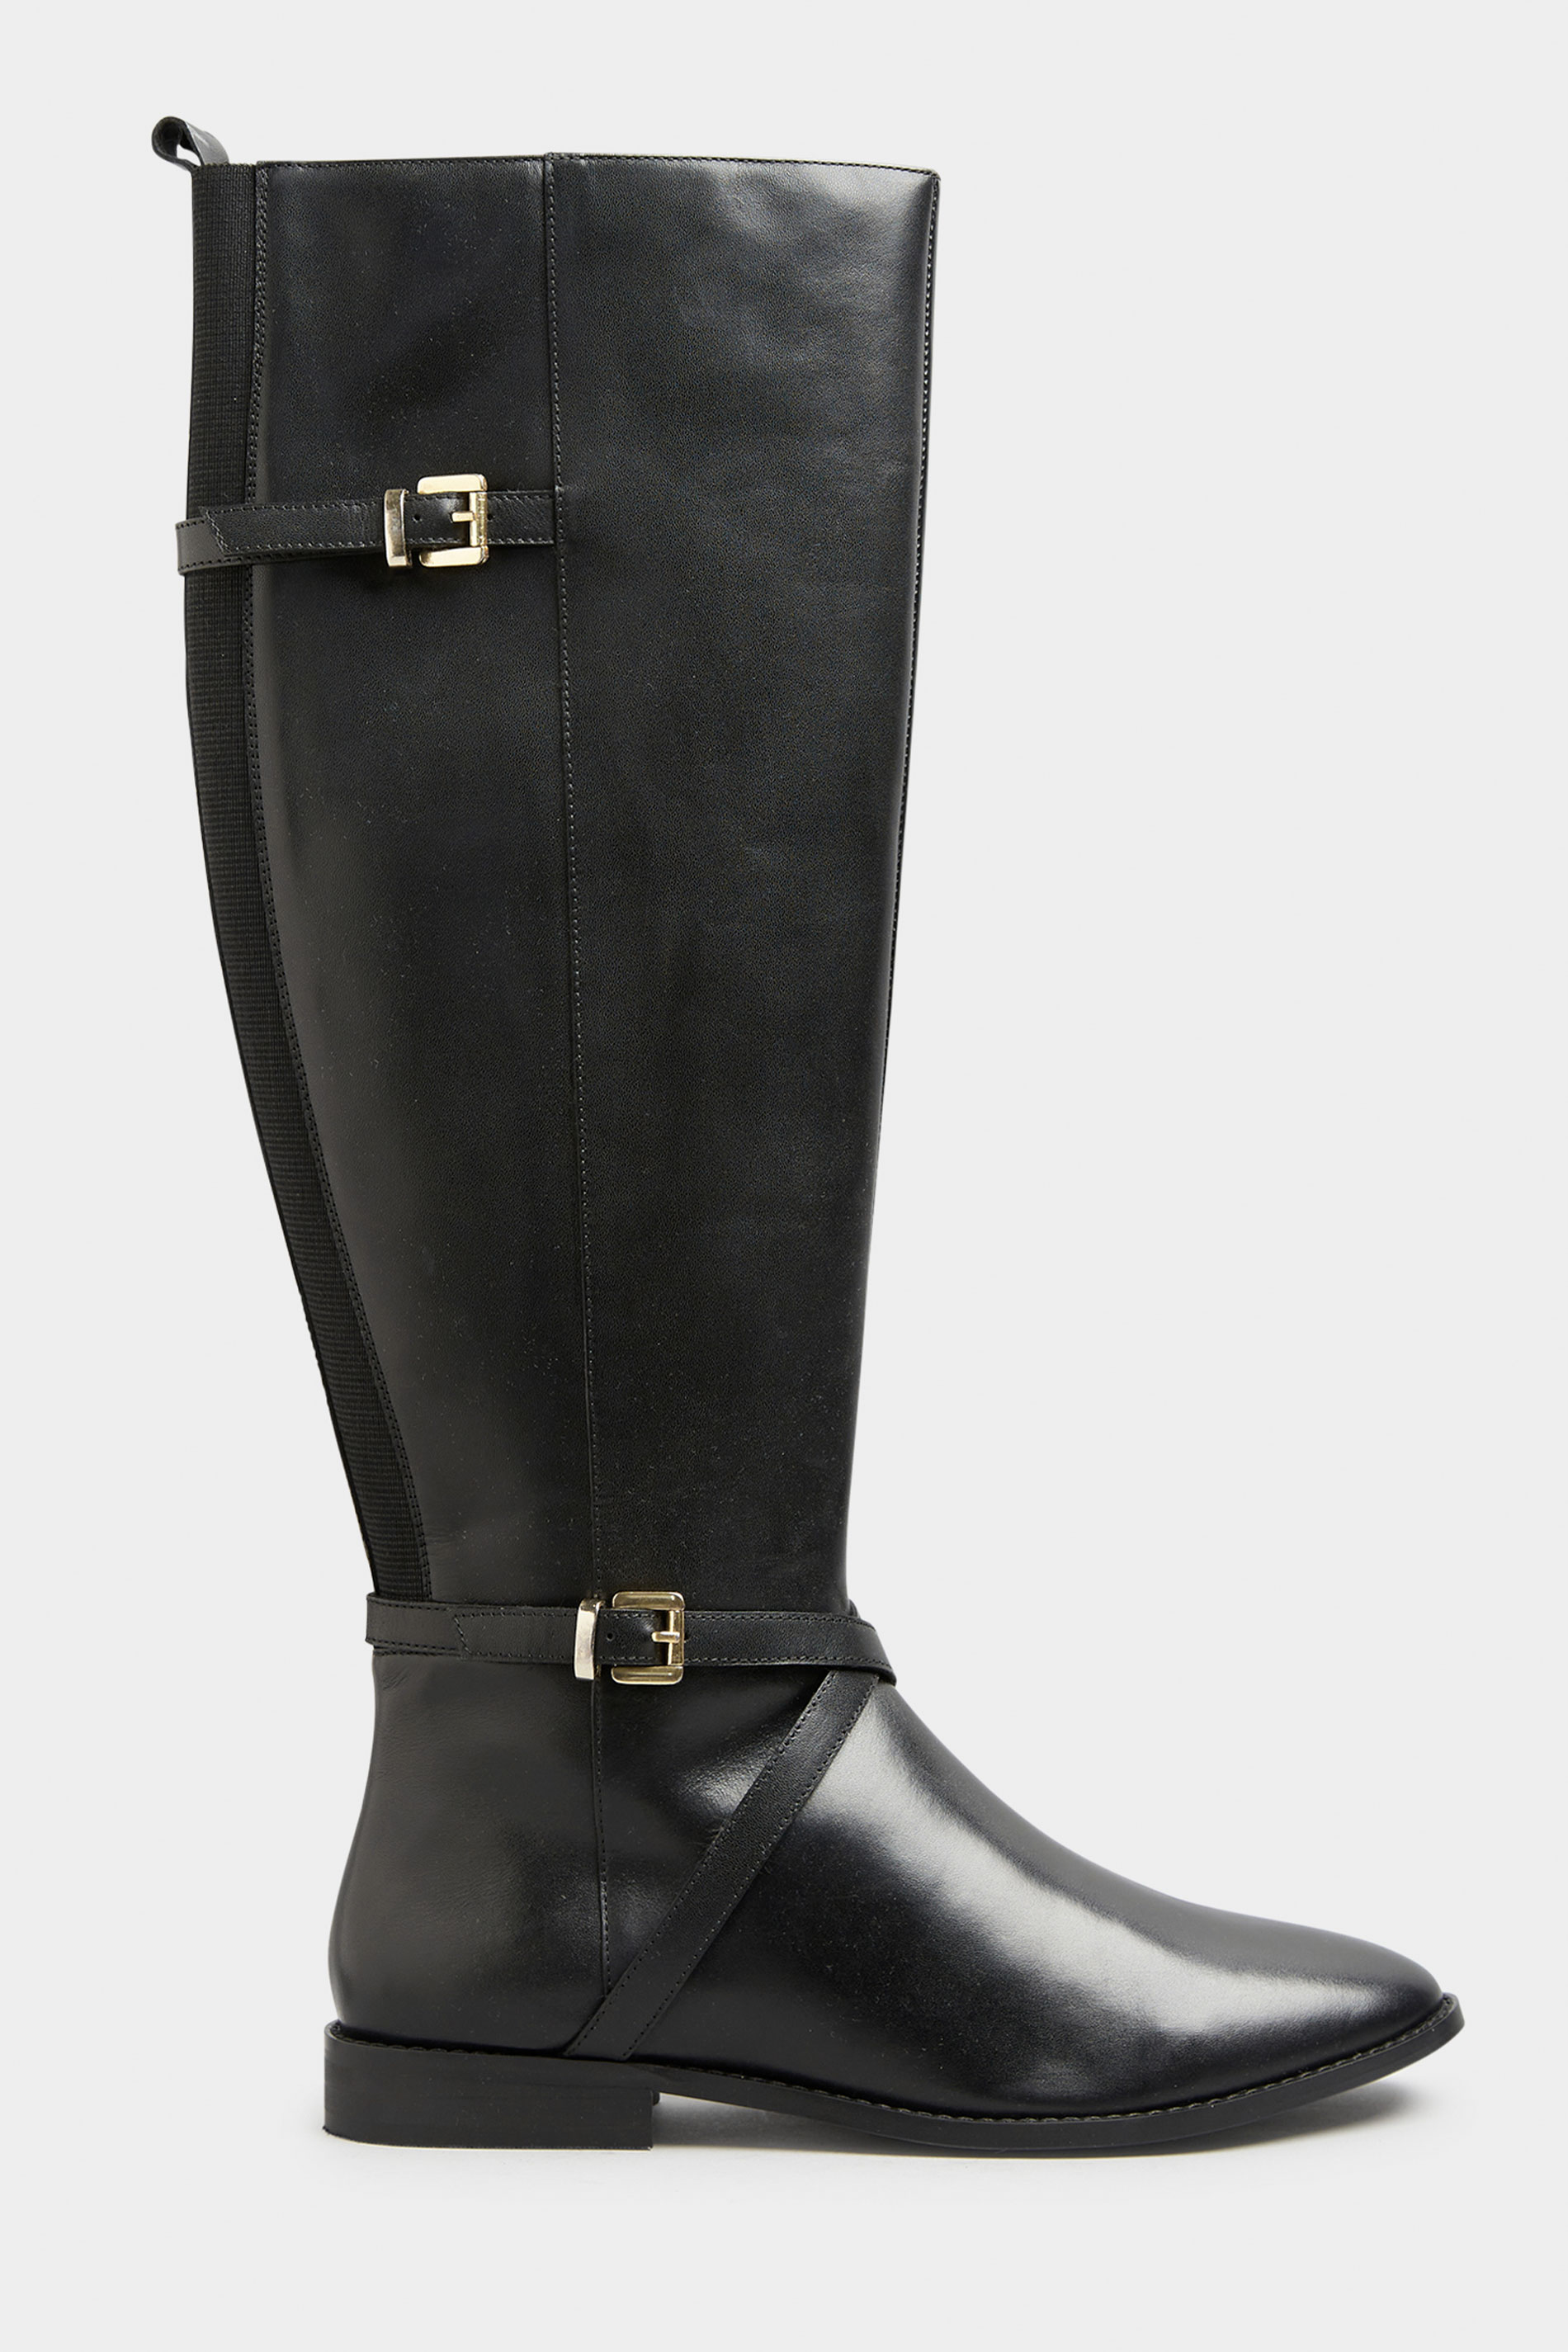 LTS Black Leather Riding Boots | Long Tall Sally 2